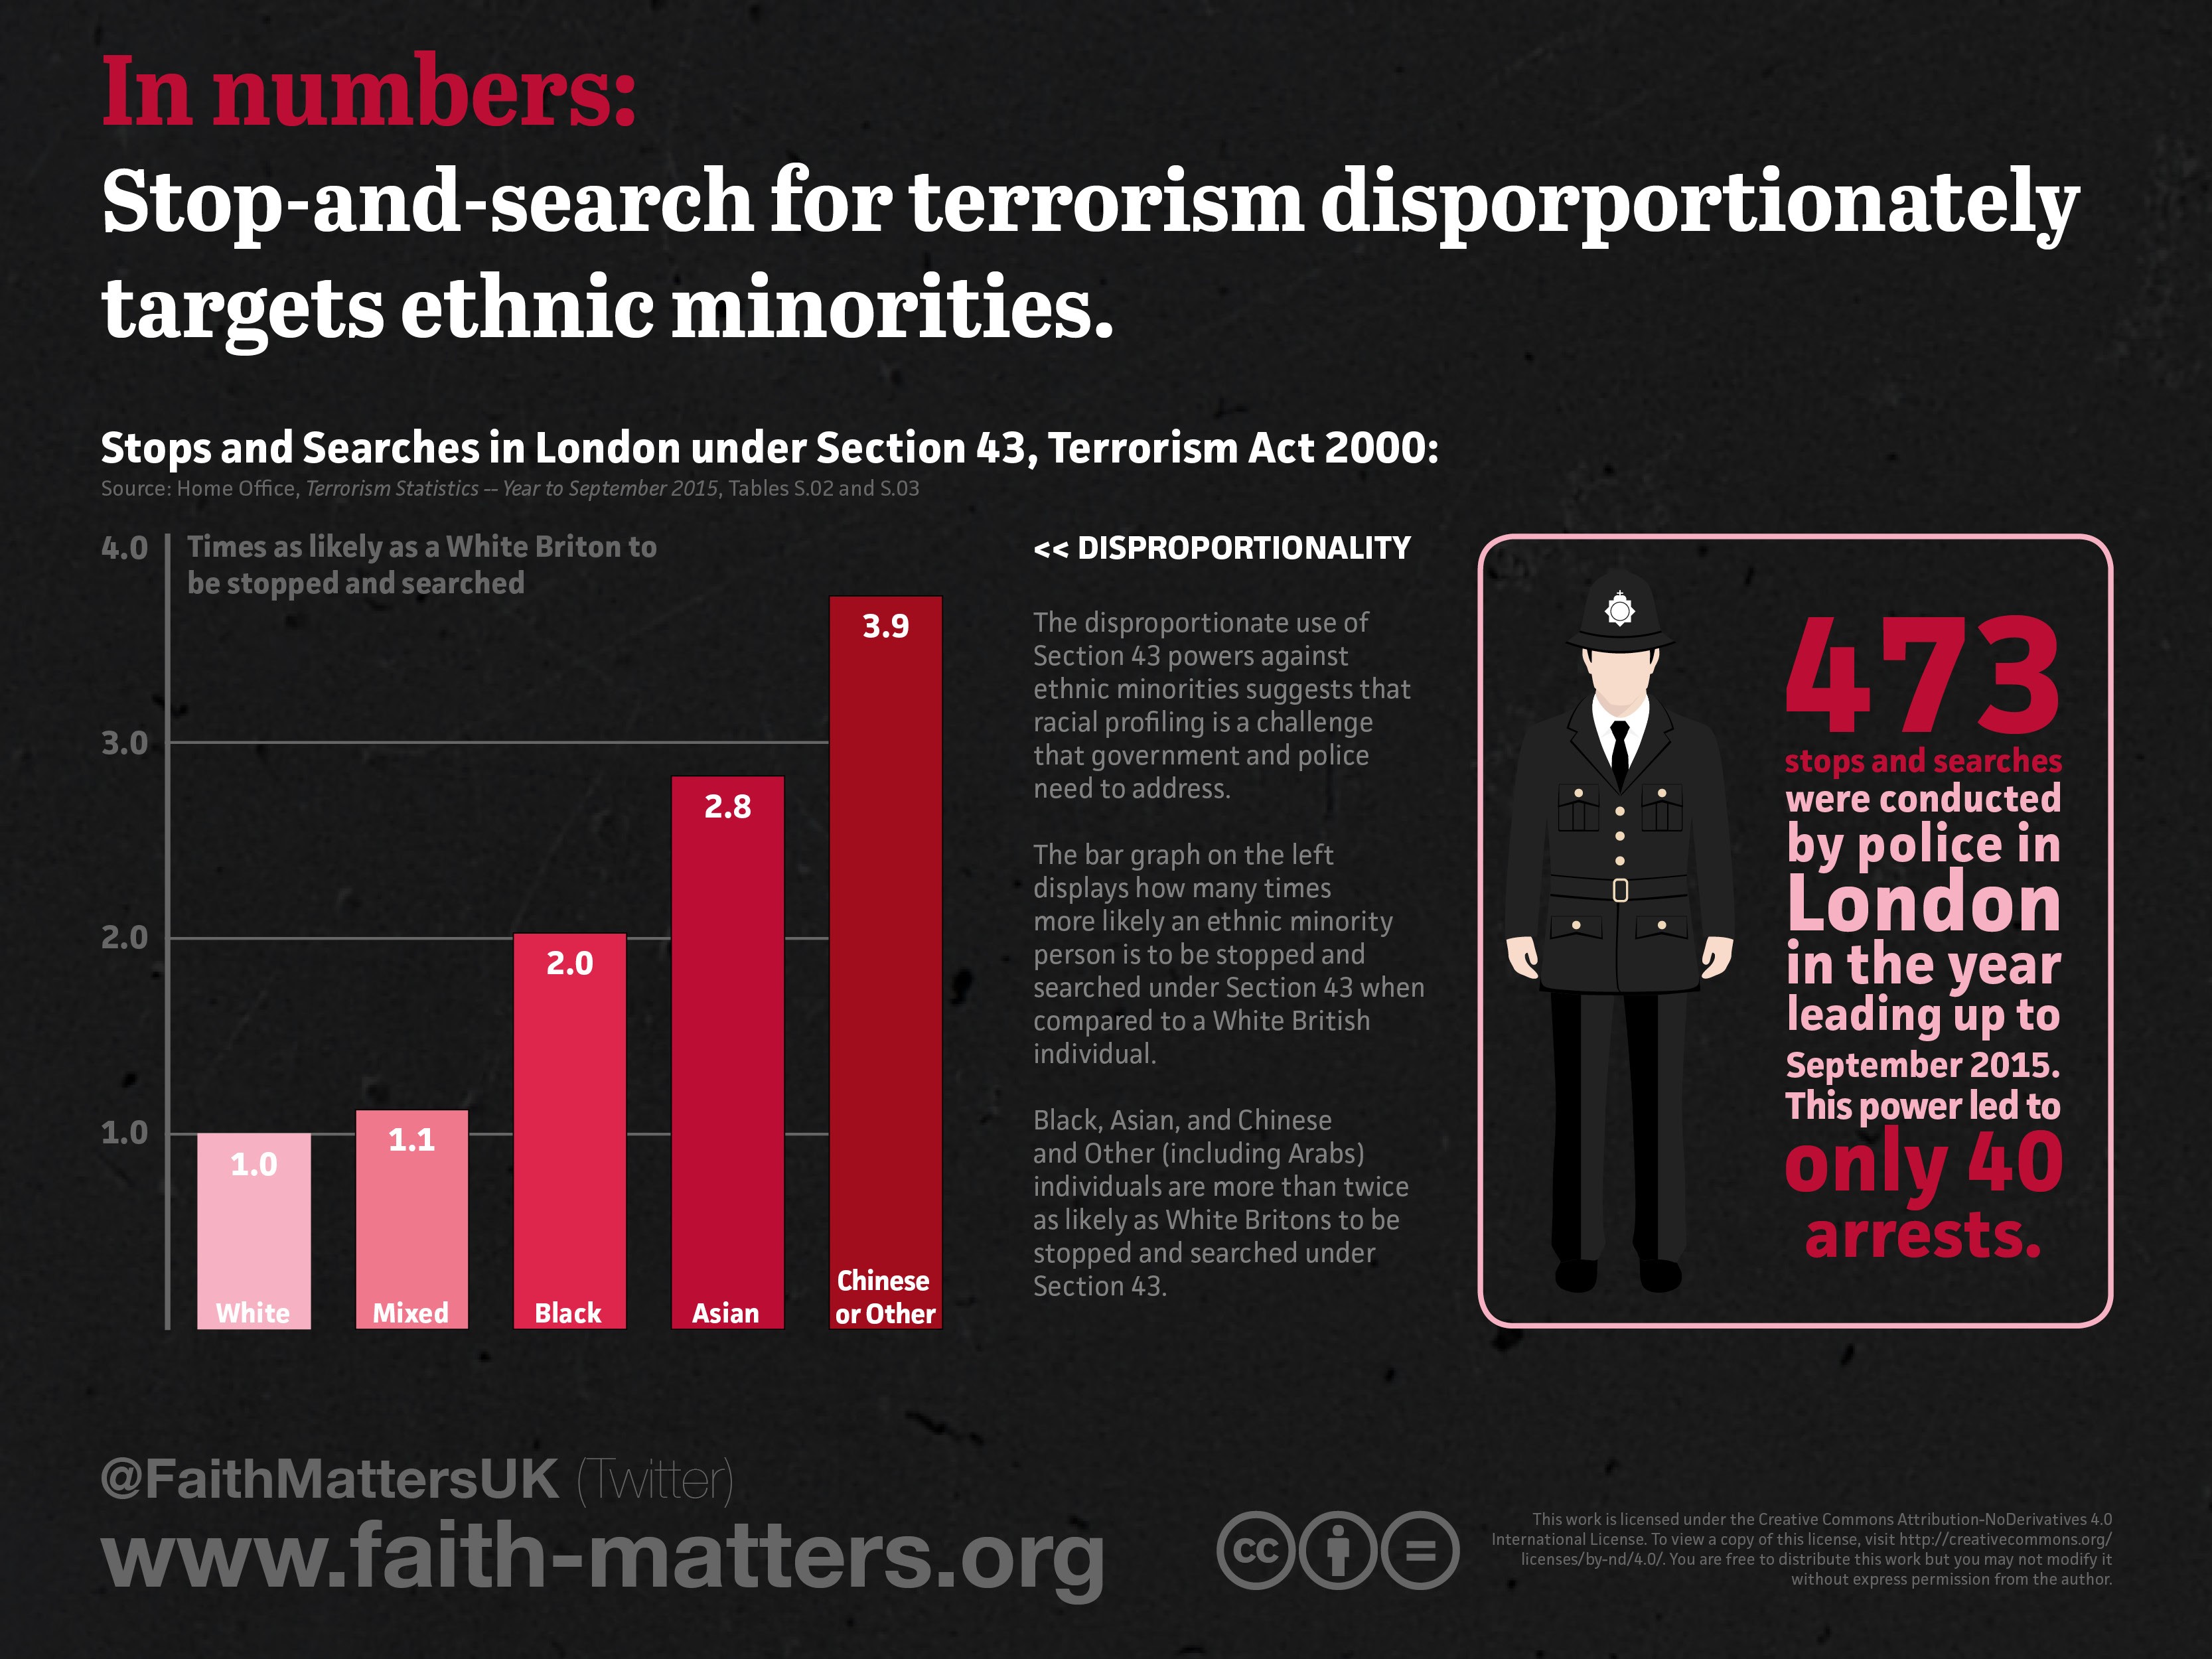 In numbers: counter-terrorism powers disproportionately affect ethnic and religious minorities in Britain